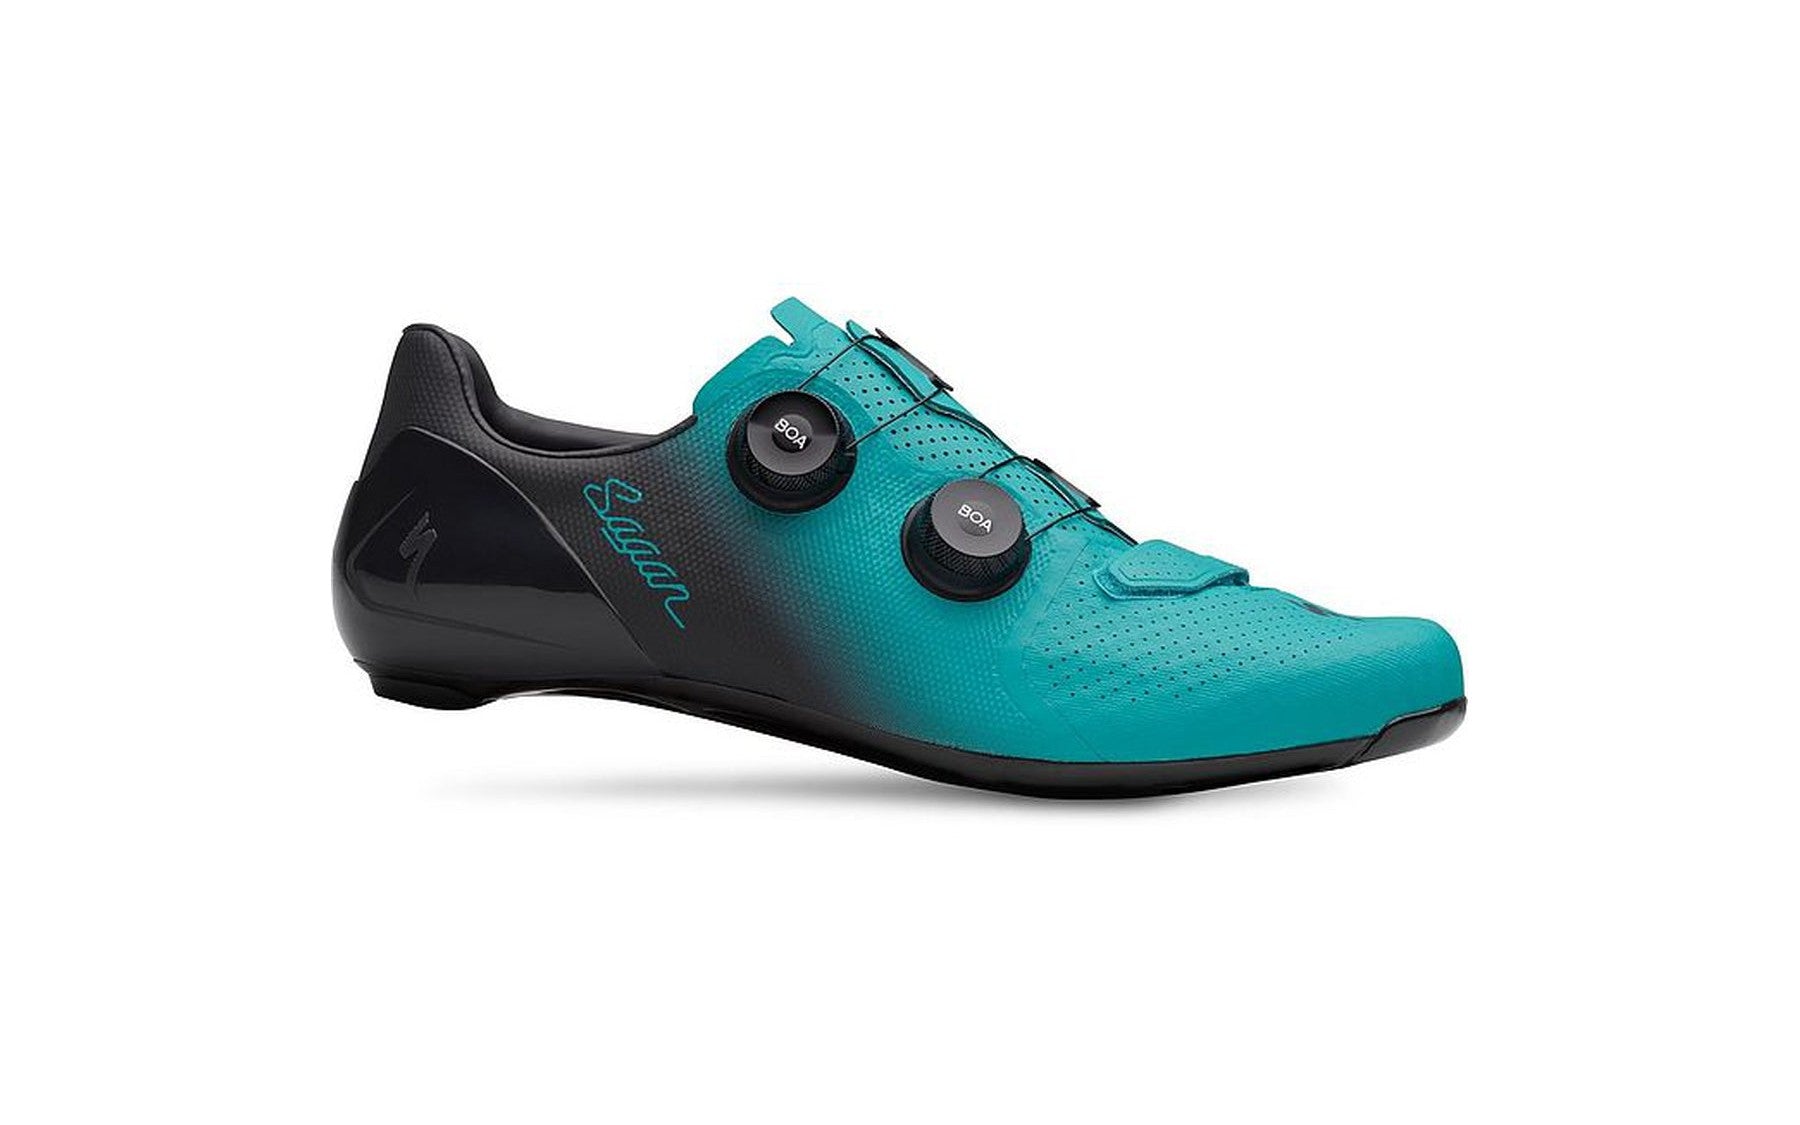 S-Works 7 Road Shoes | Specialized South Africa